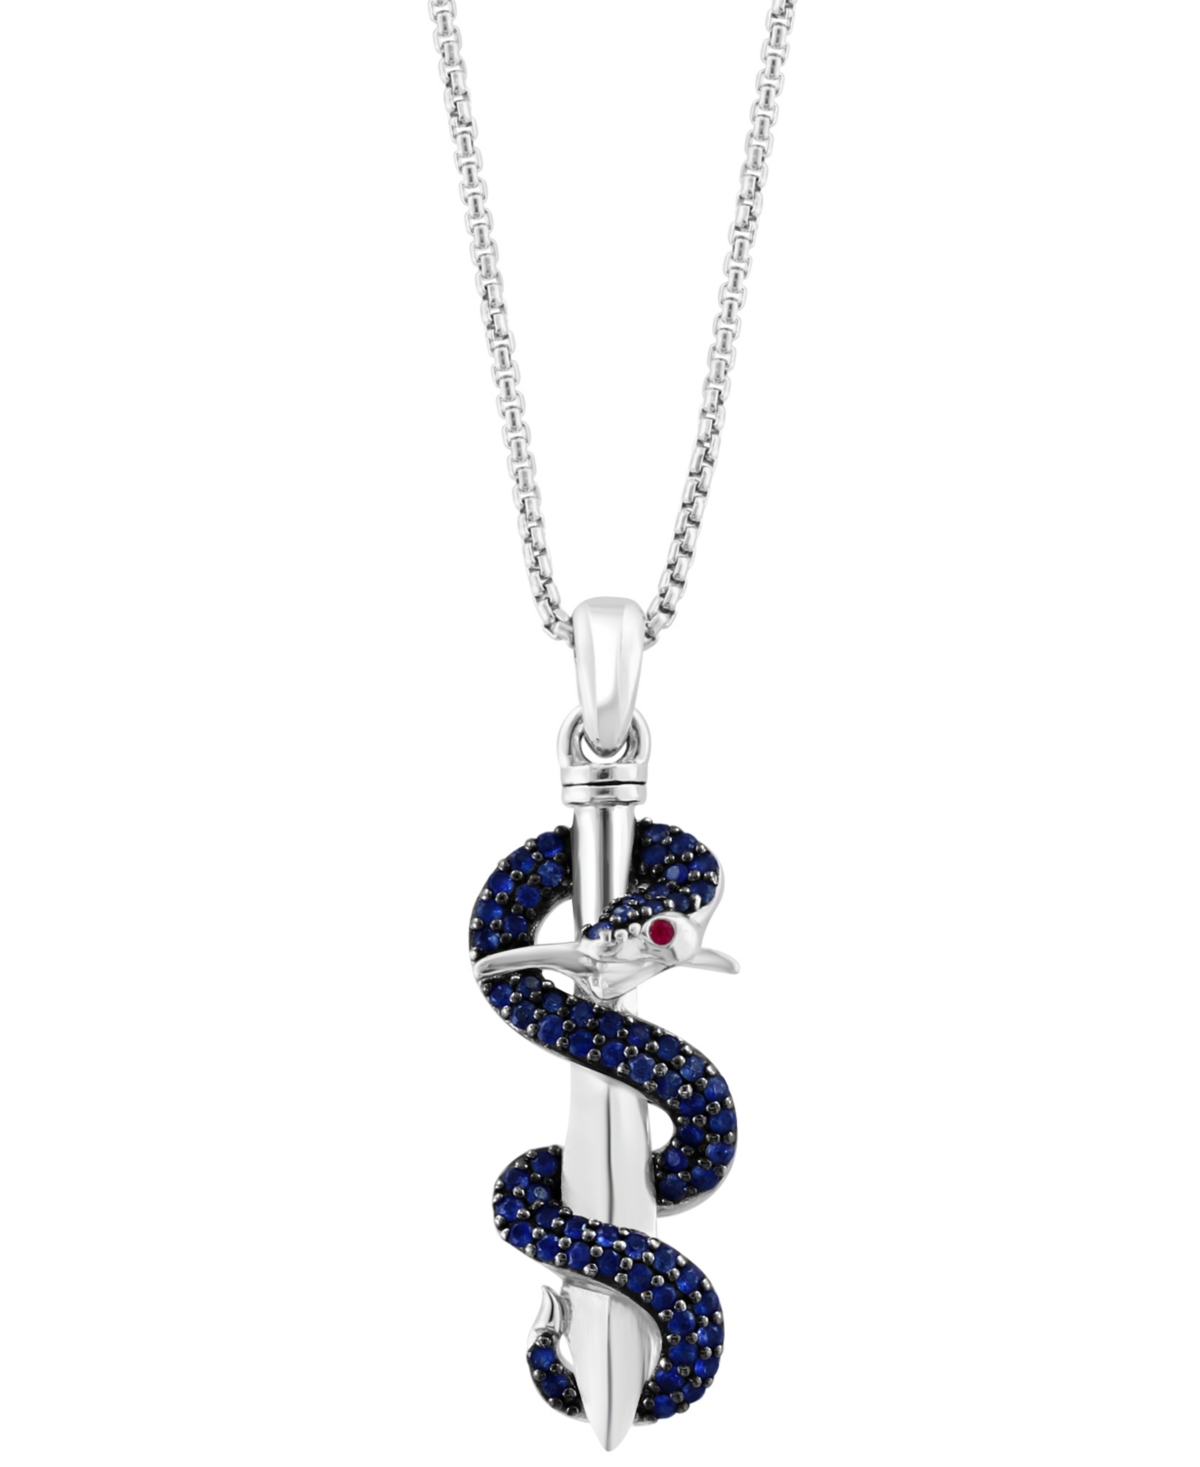 Effy Men's Sapphire (5/8 ct. t.w.) & Ruby Accent Snake & Sword 22" Pendant Necklace in Sterling Silver - Sterling Silver